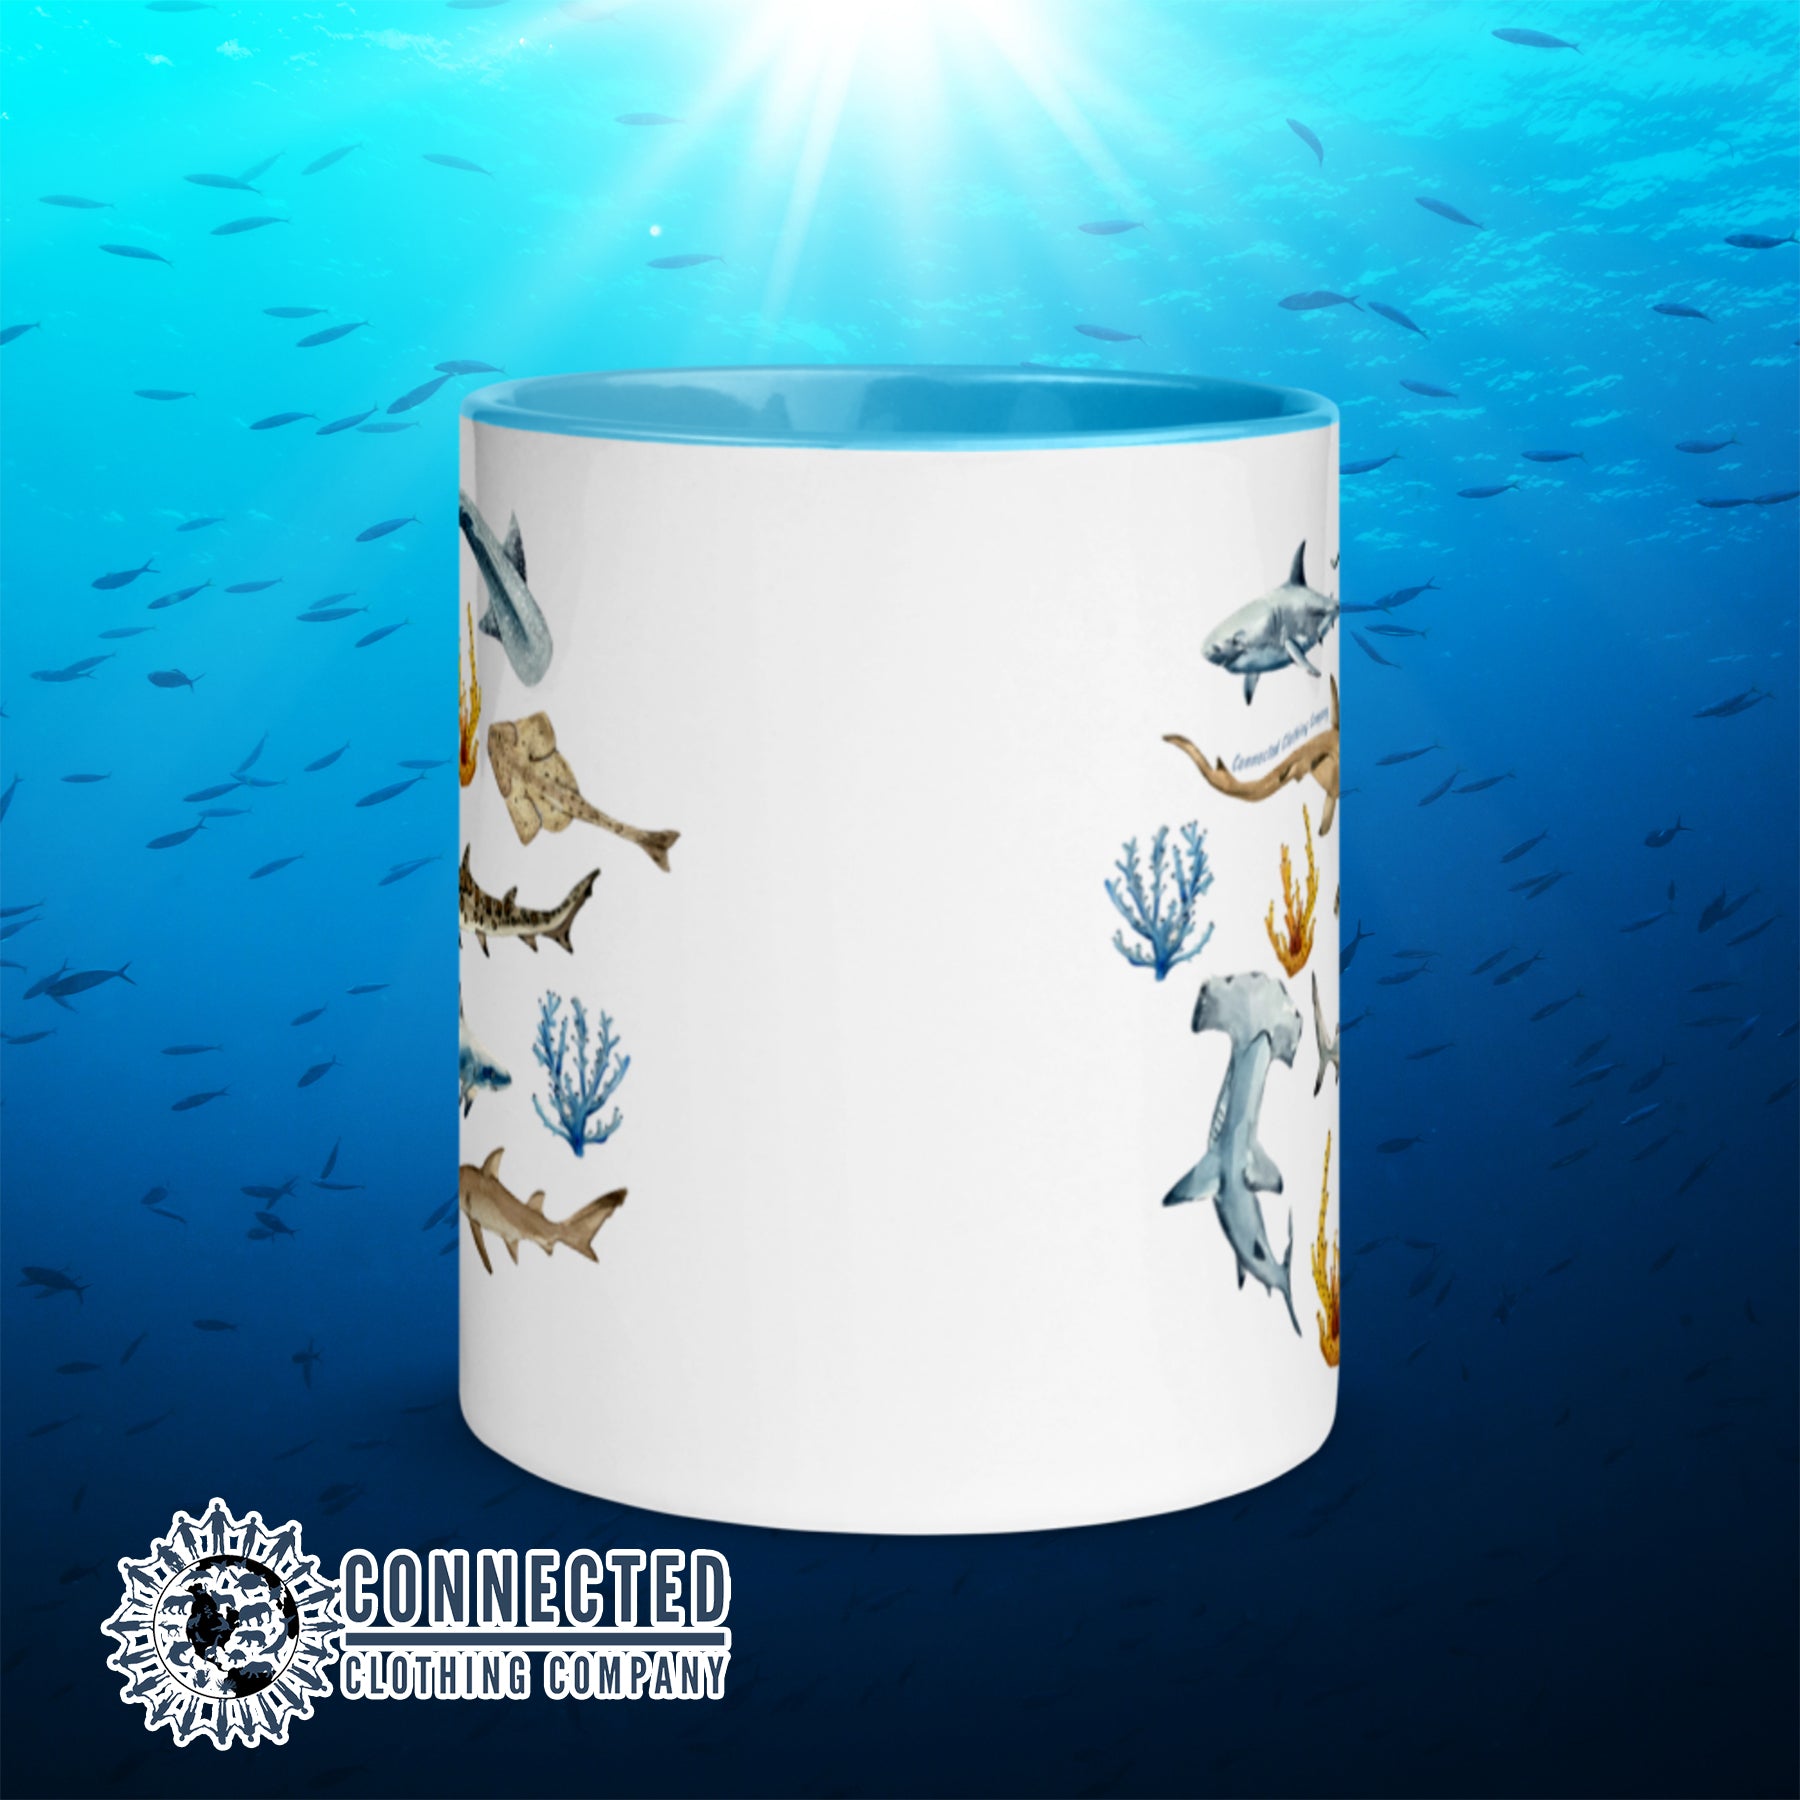 Shark Ocean Watercolor Colored Mug With Blue Coloring on Inside, Rim, and Handle - Connected Clothing Company - Ethically and Sustainably Made - 10% donated to Oceana shark conservation